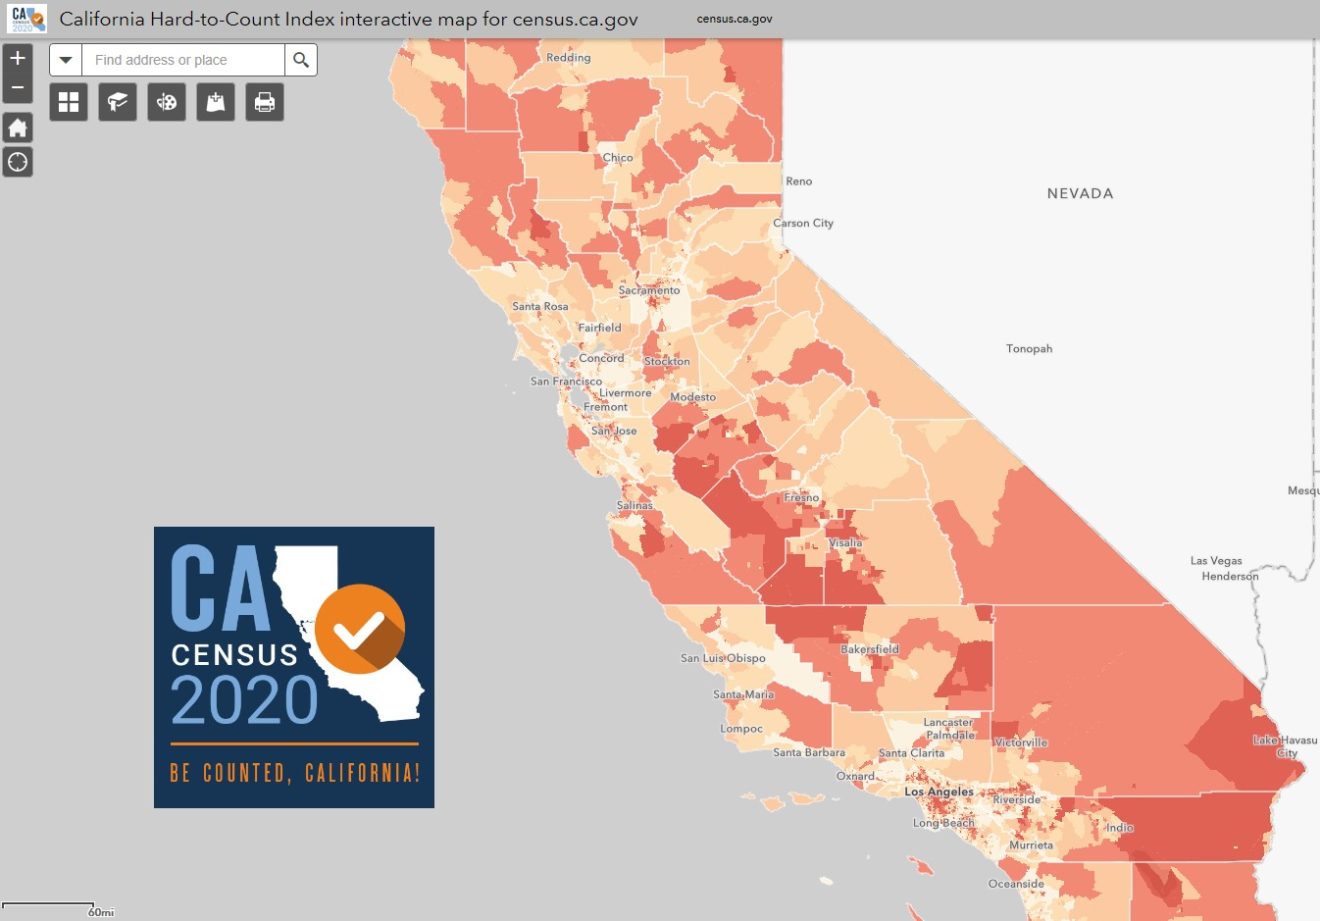 CALIFORNIA IS RAMPING UP THE STATE’S UNPRECEDENTED 2020 CENSUS CAMPAIGN